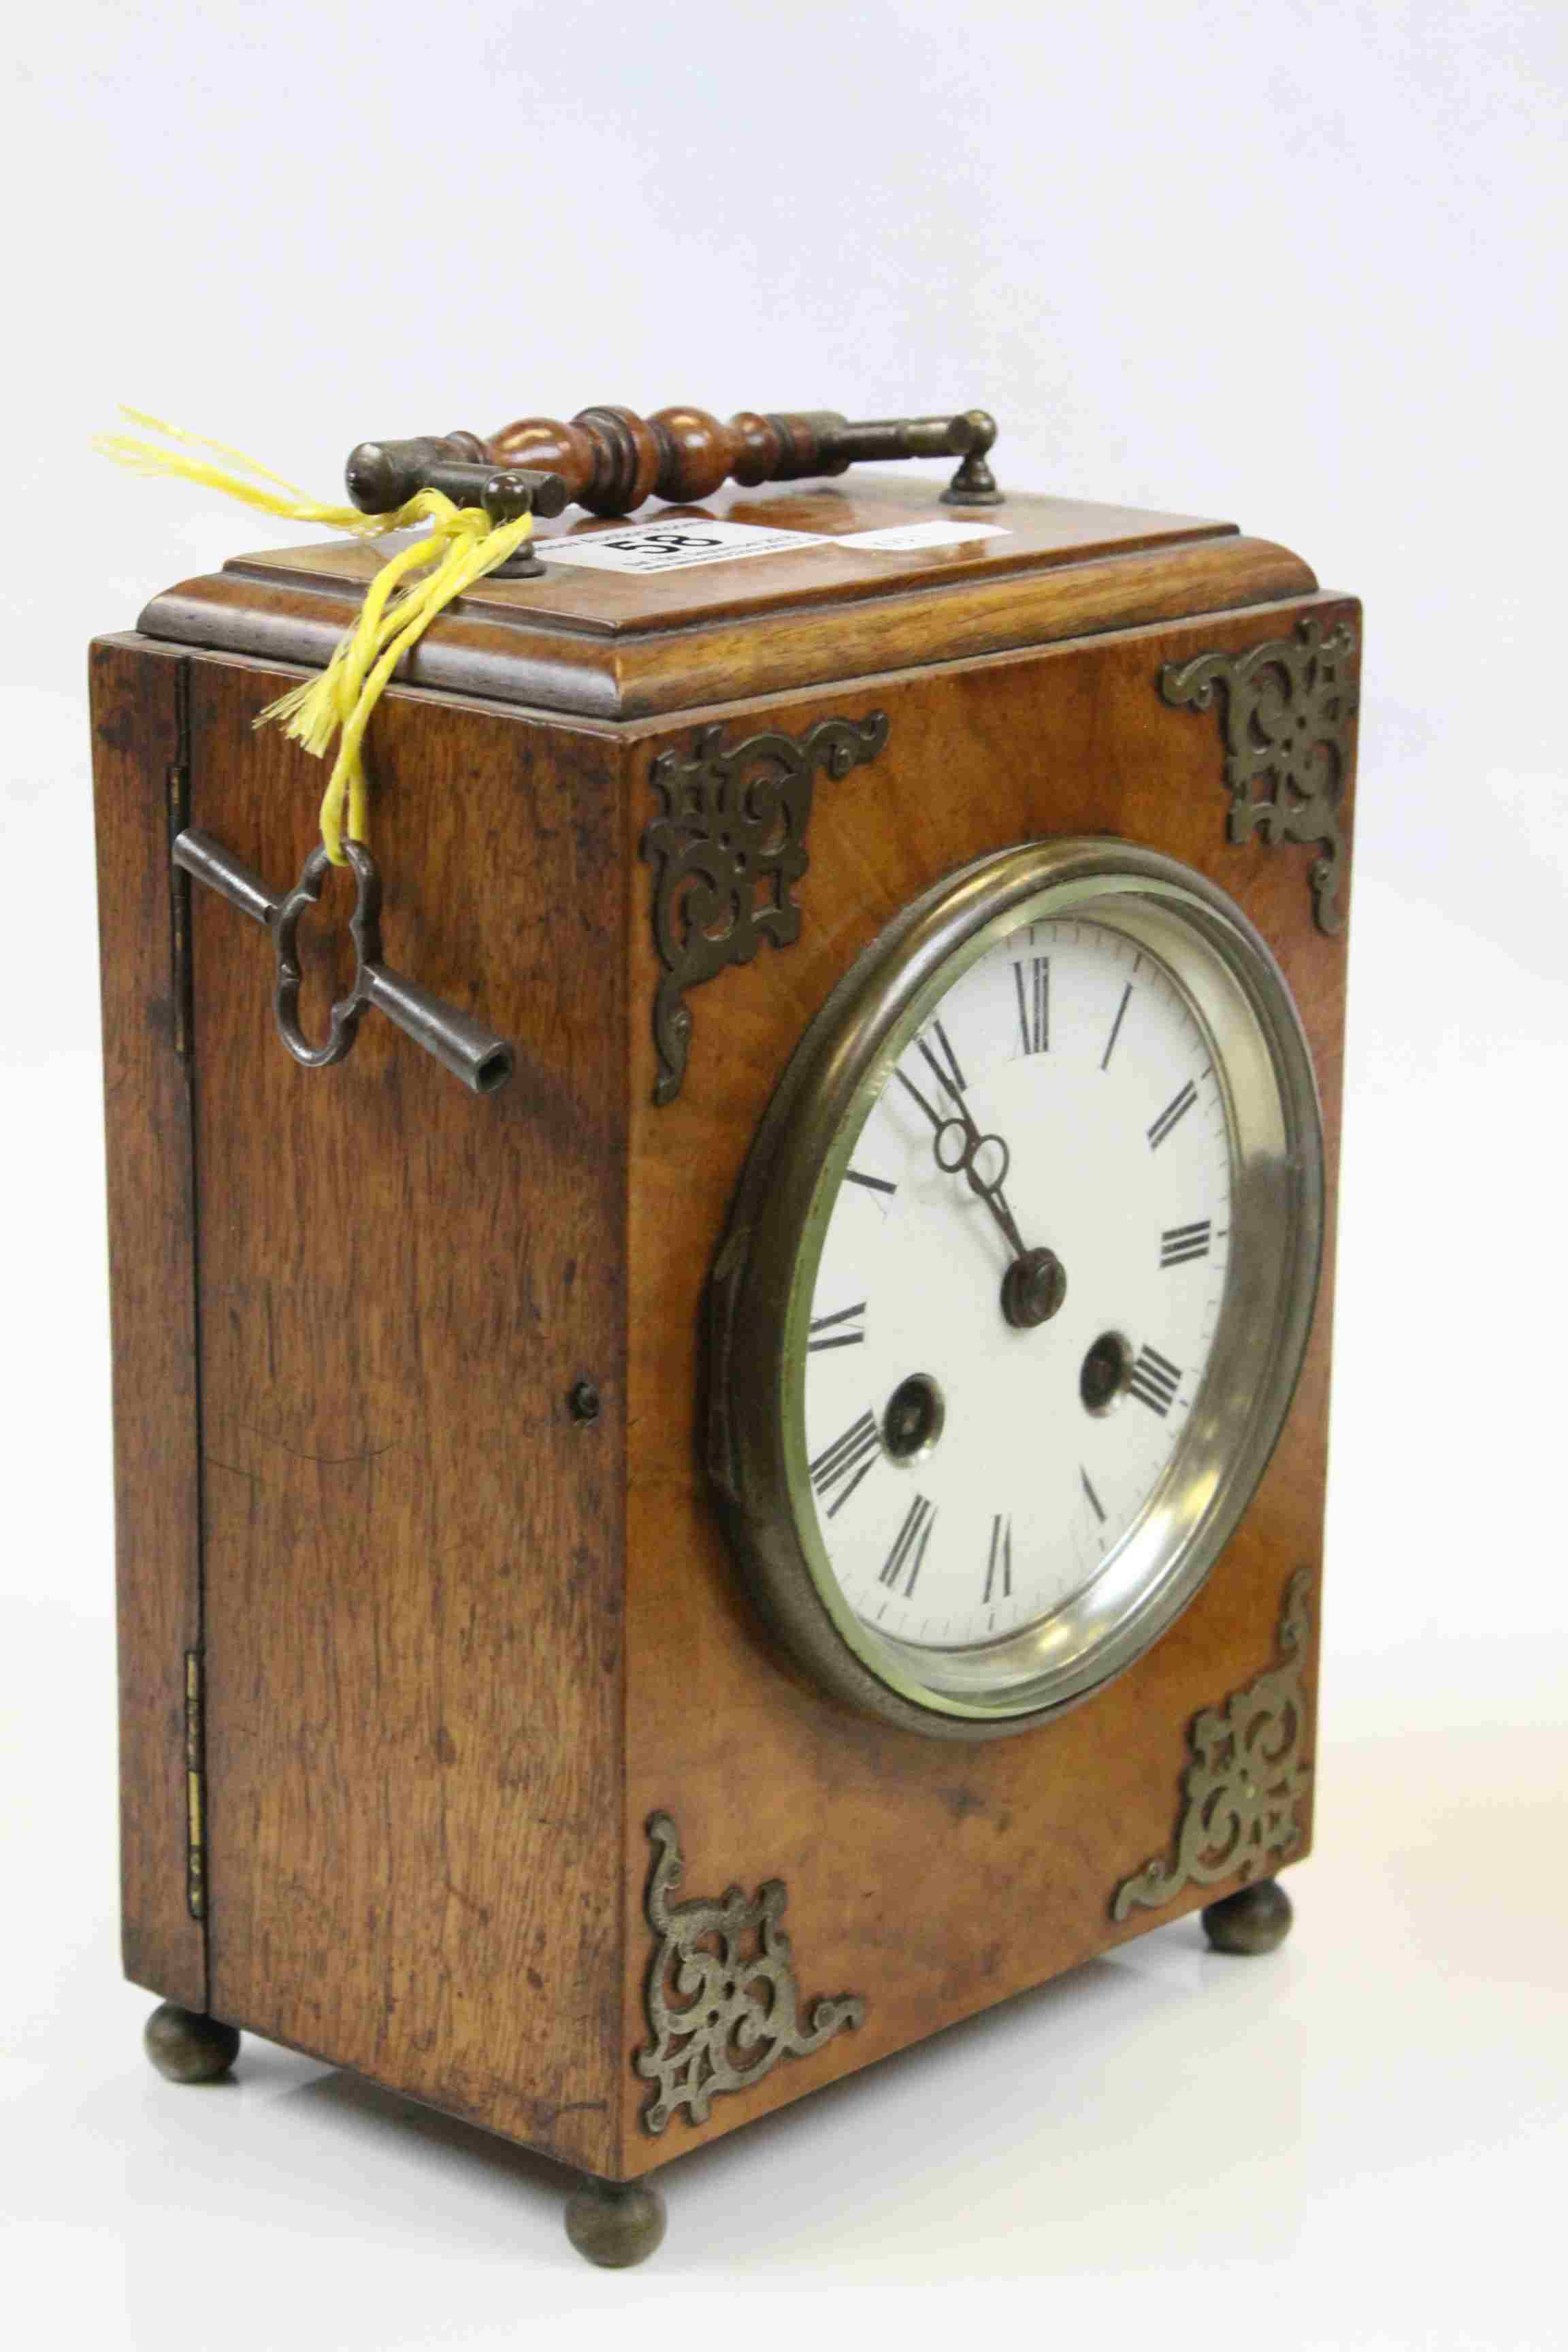 Wooden cased Key wind mantle clock with enamel dial, Brass fittings and Key - Image 5 of 5